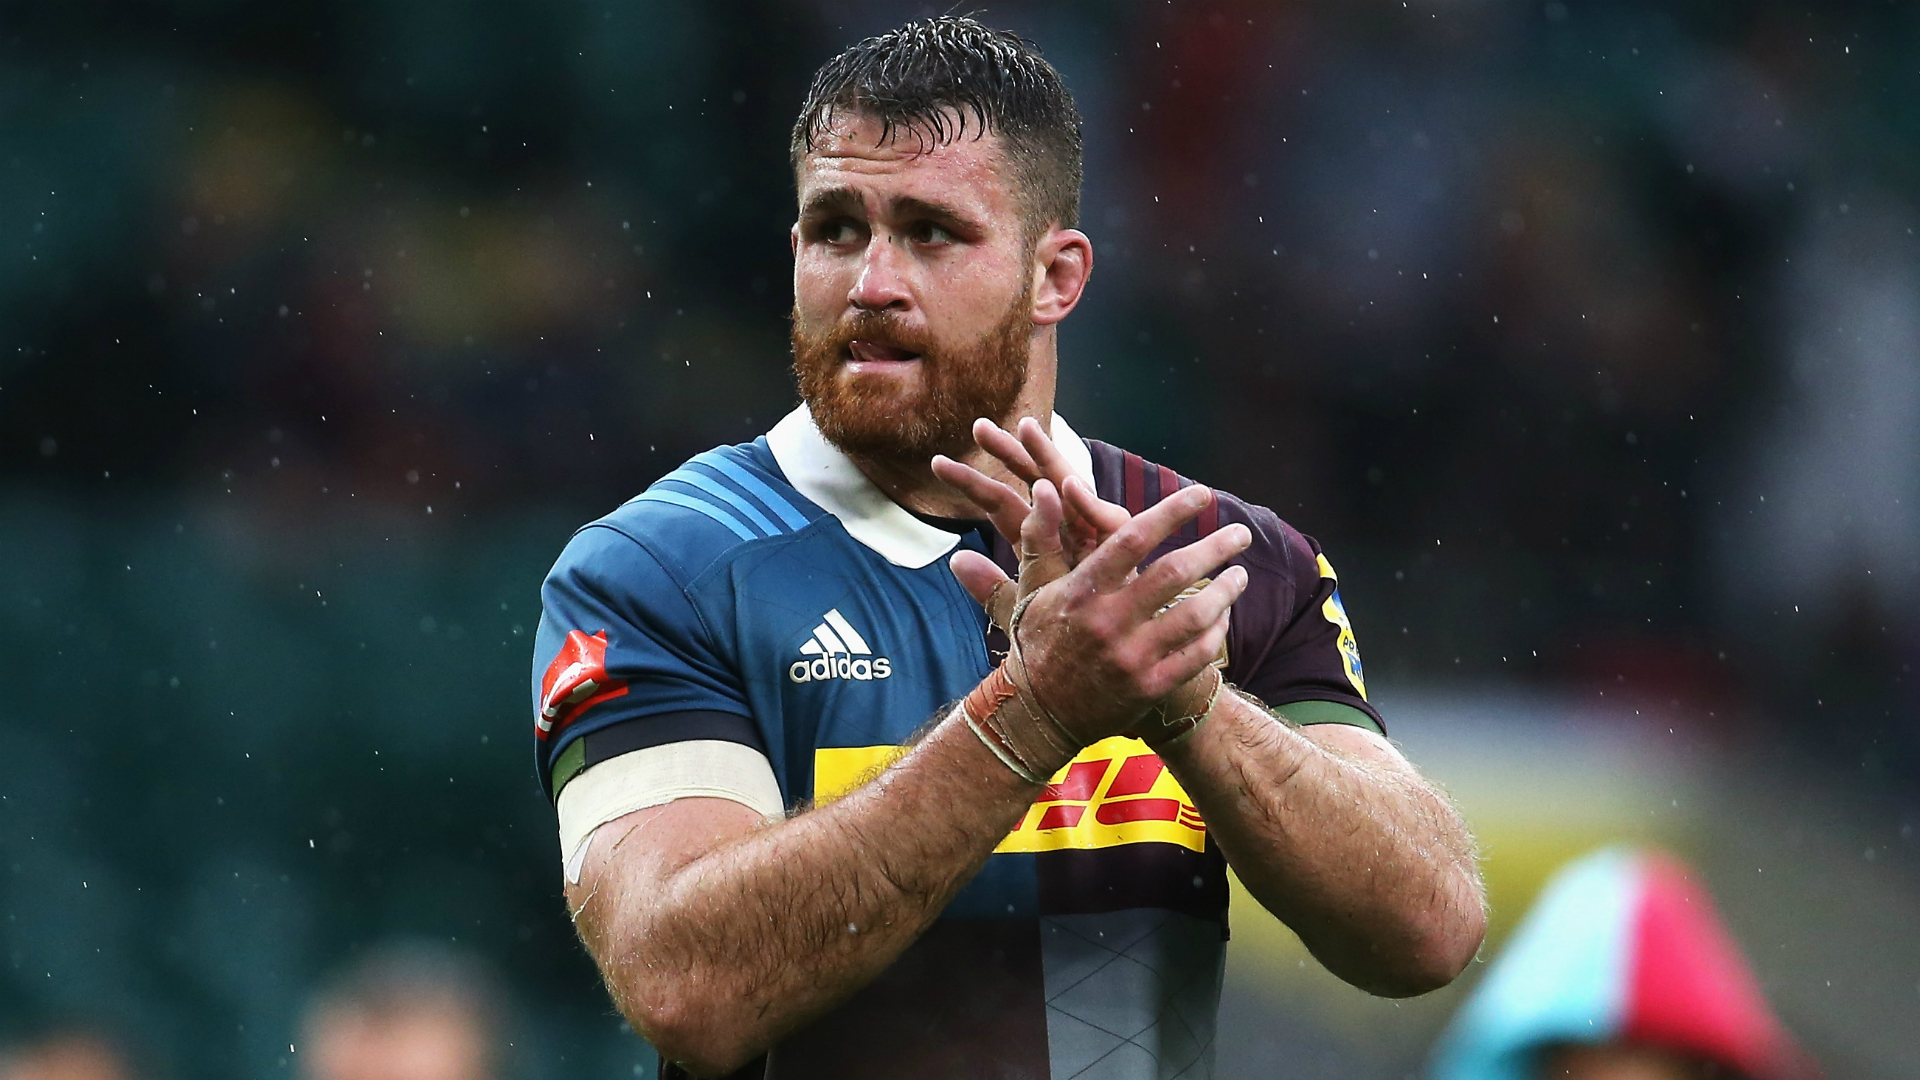 After captaining the Reds, Australia and Harlequins, James Horwill is preparing for the final weeks of his career.